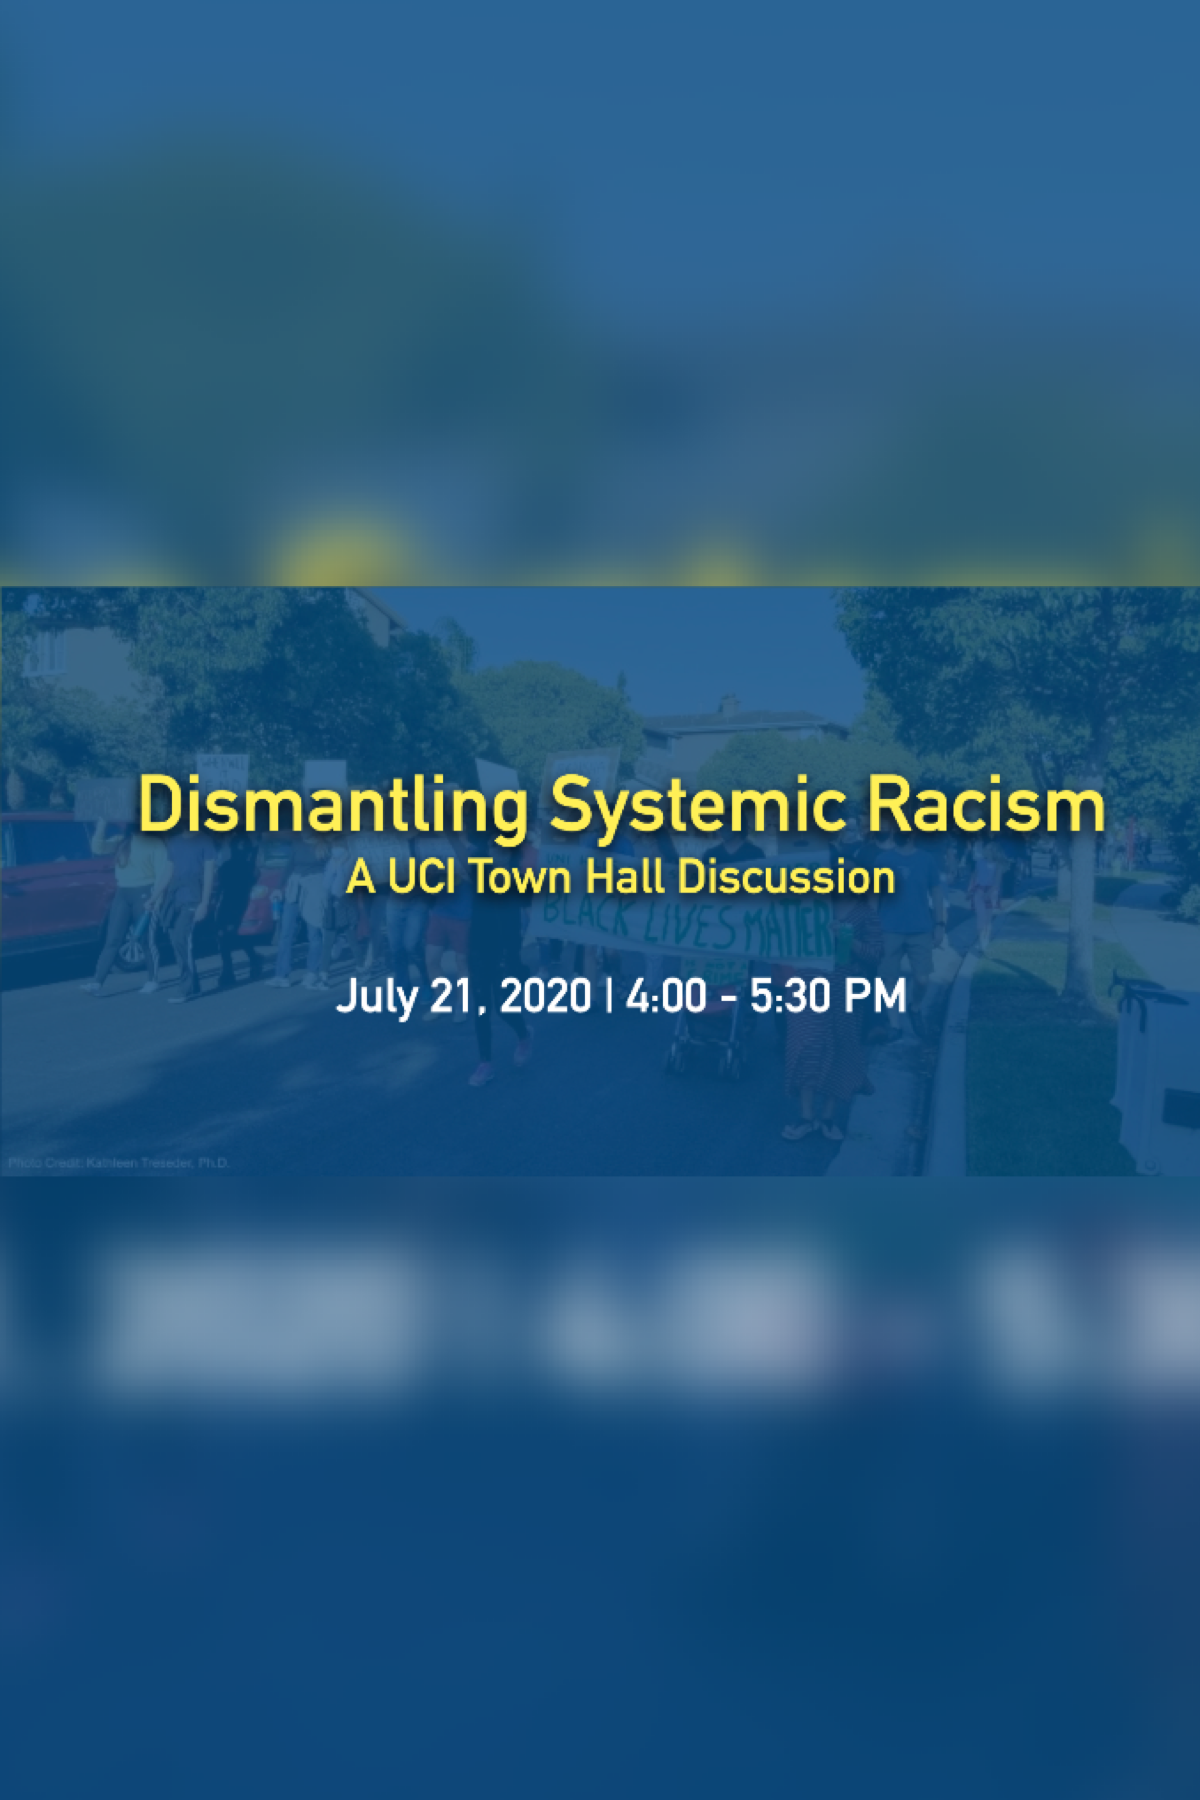 Dismantling Systemic Racism – A UCI Town Hall Discussion